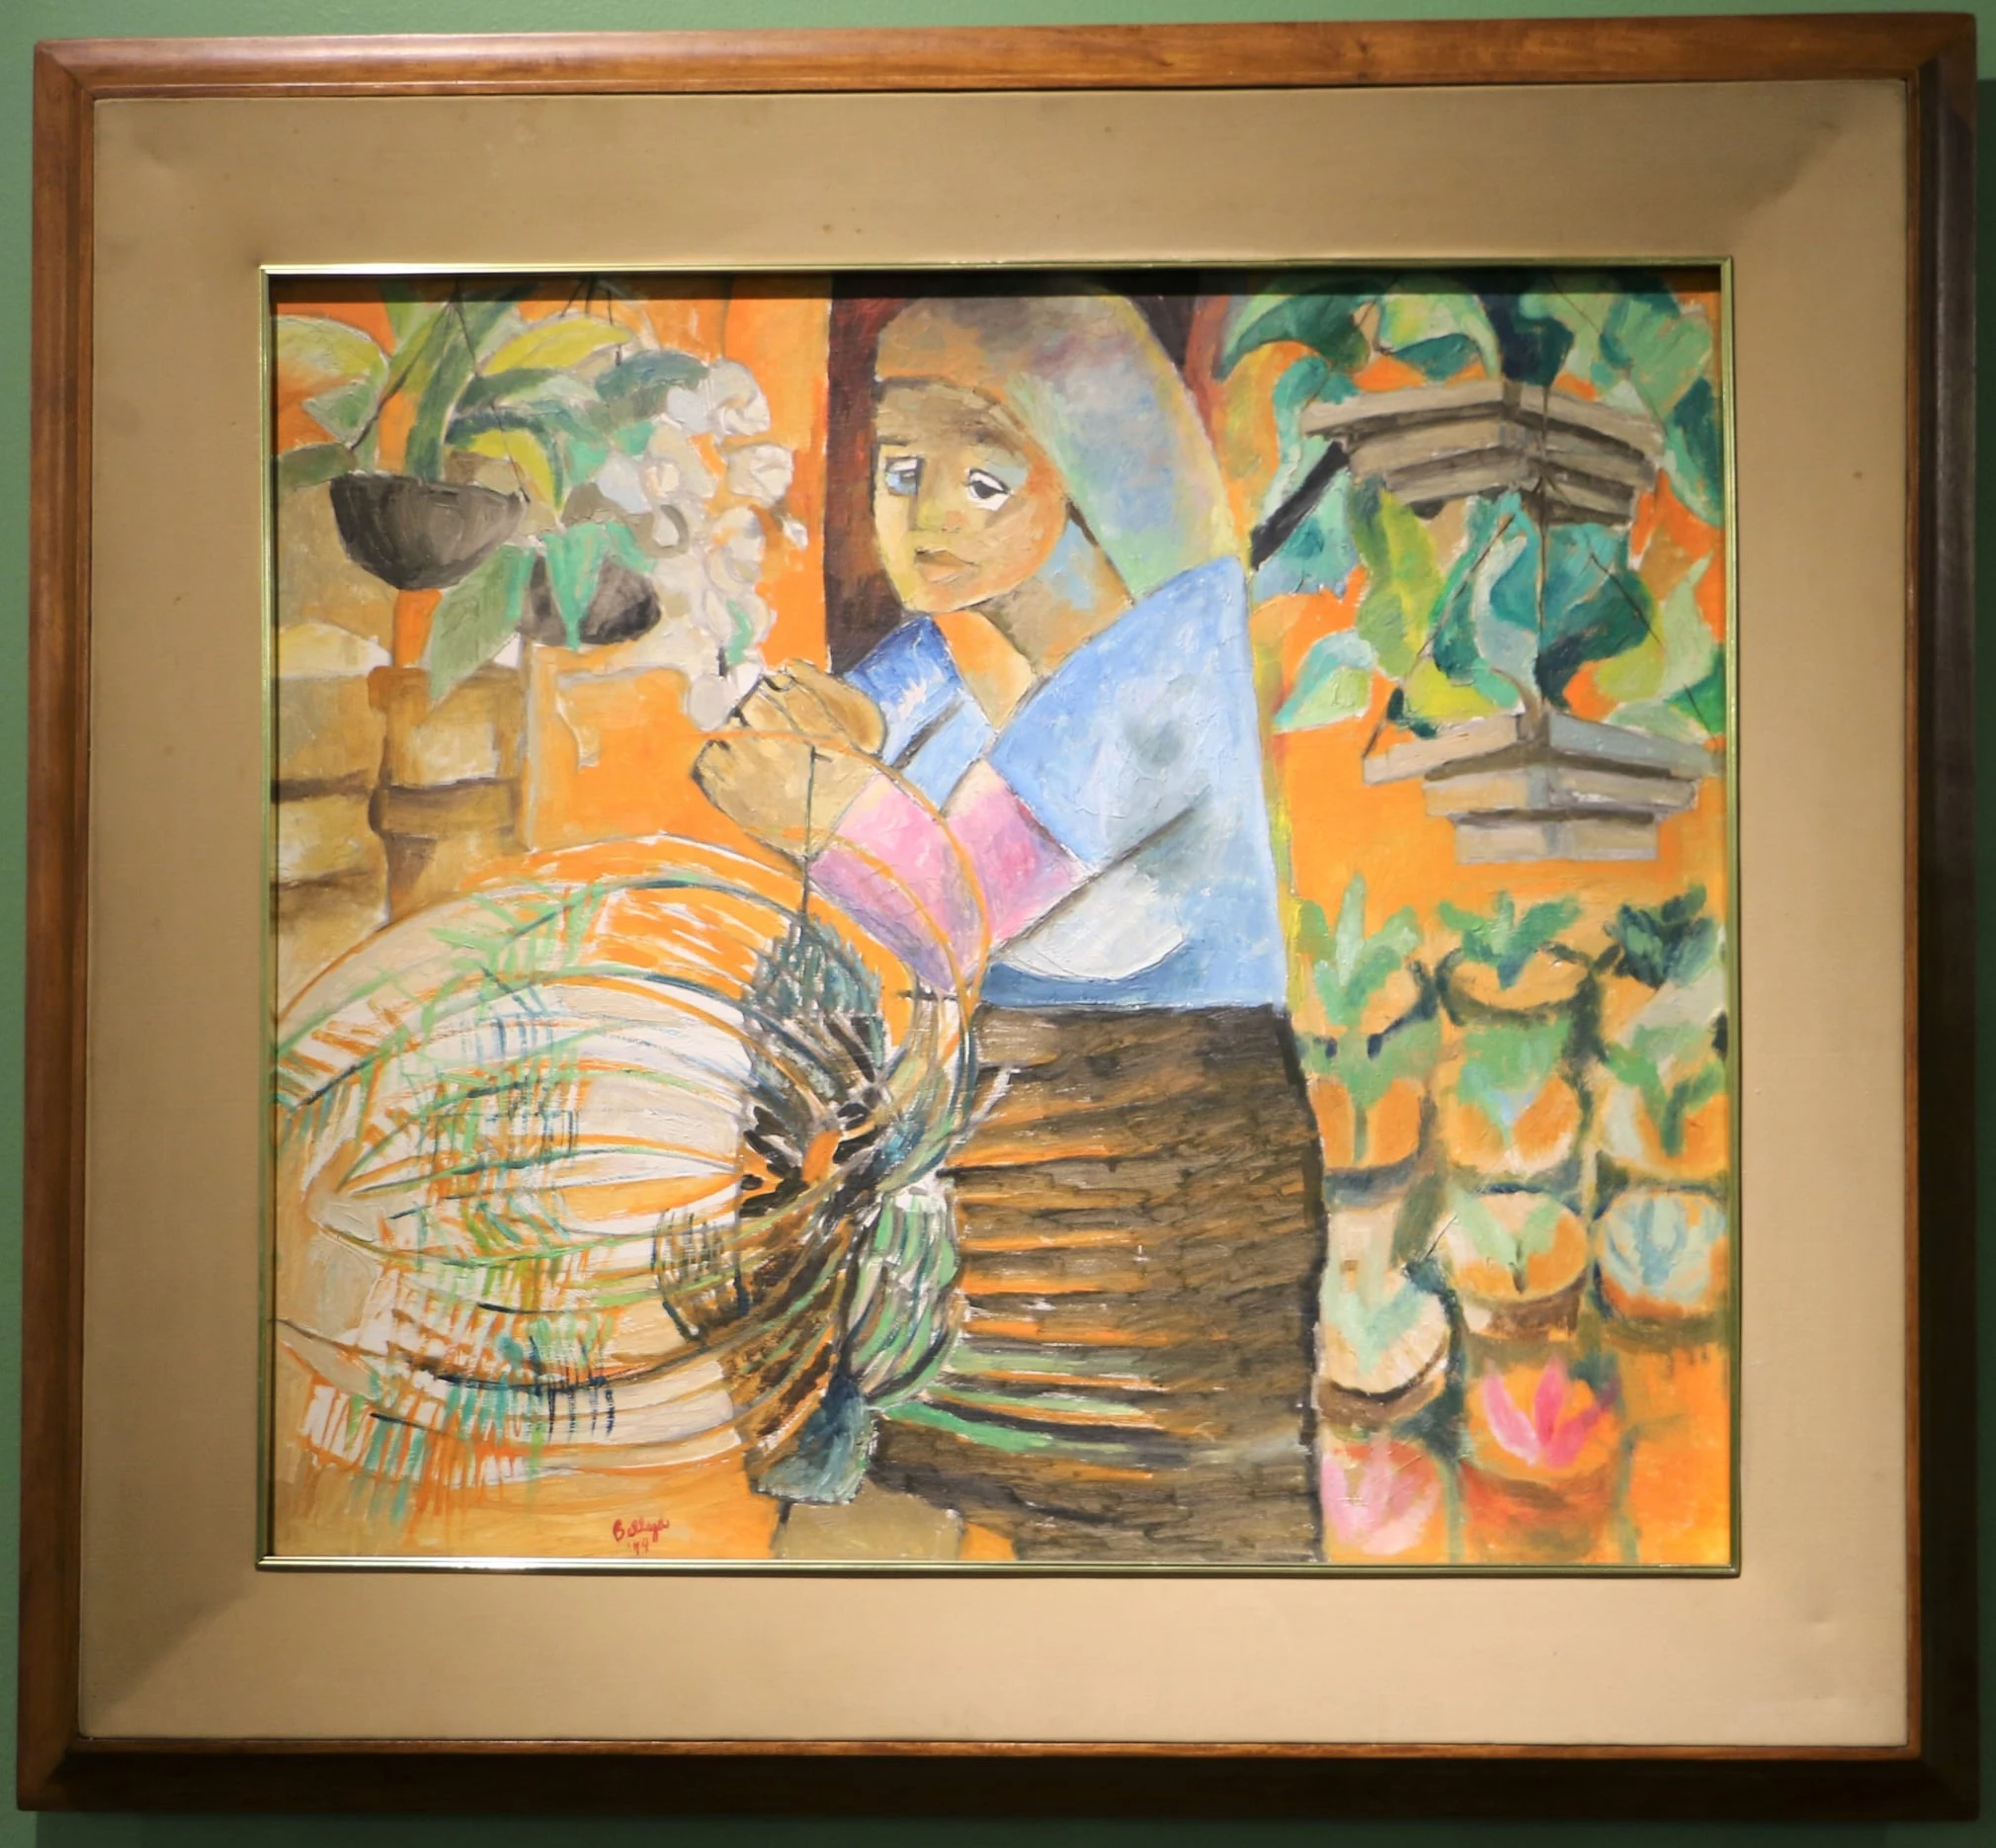 Basket Weaver Painting (1974) by Norma Belleza